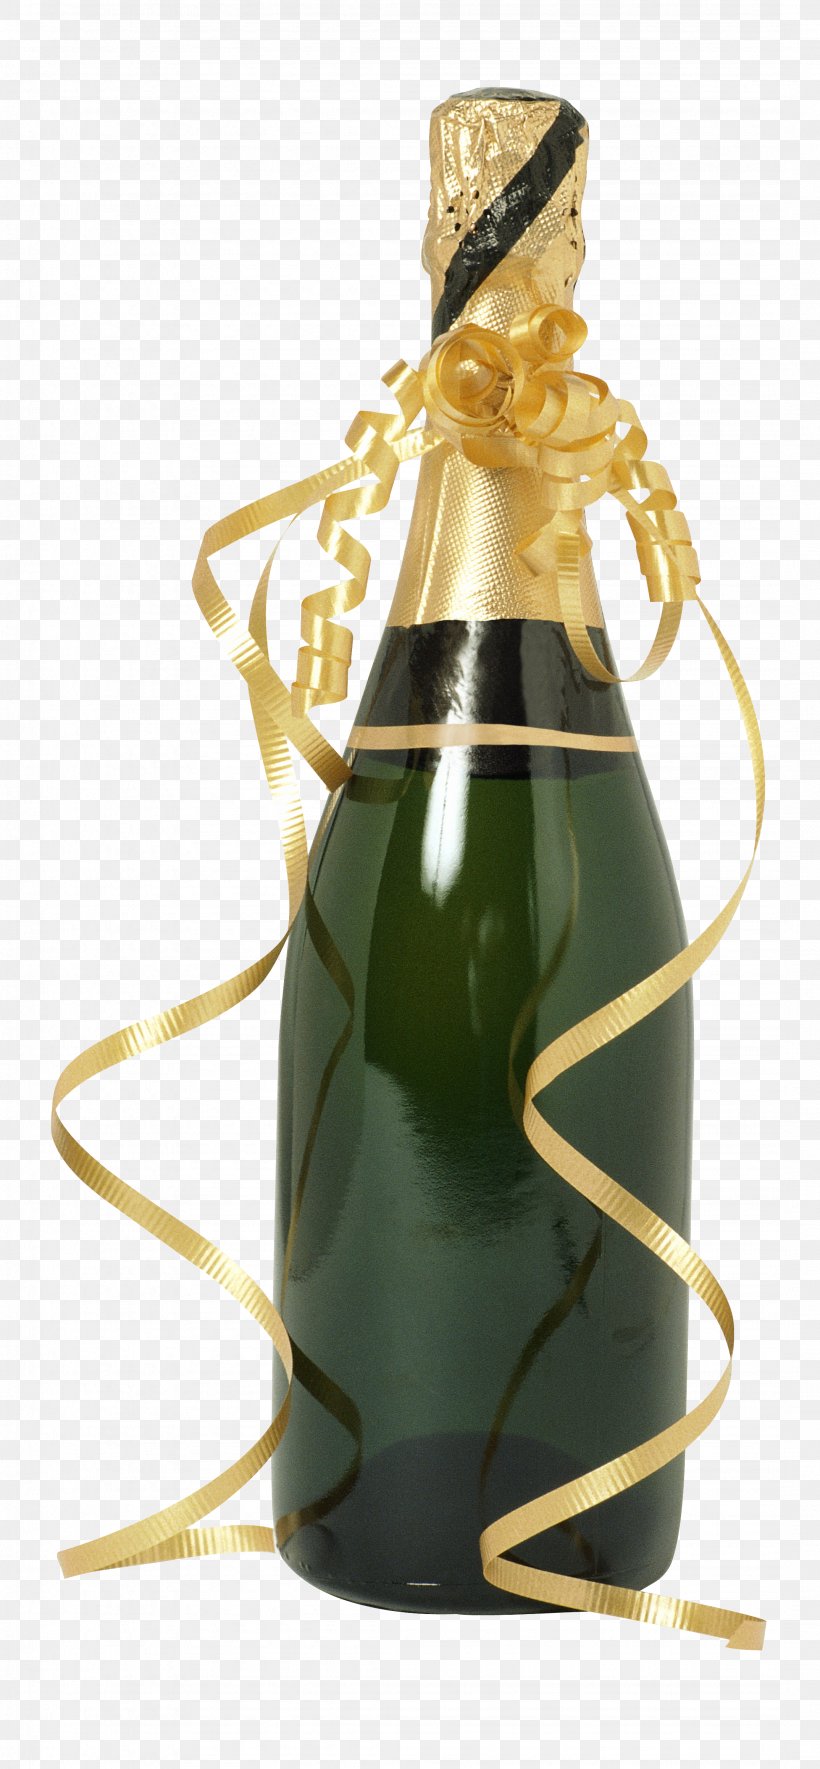 Champagne Sparkling Wine Bottle, PNG, 2148x4635px, Champagne, Alcoholic Drink, Bottle, Champagne Breakfast, Champagne Glass Download Free